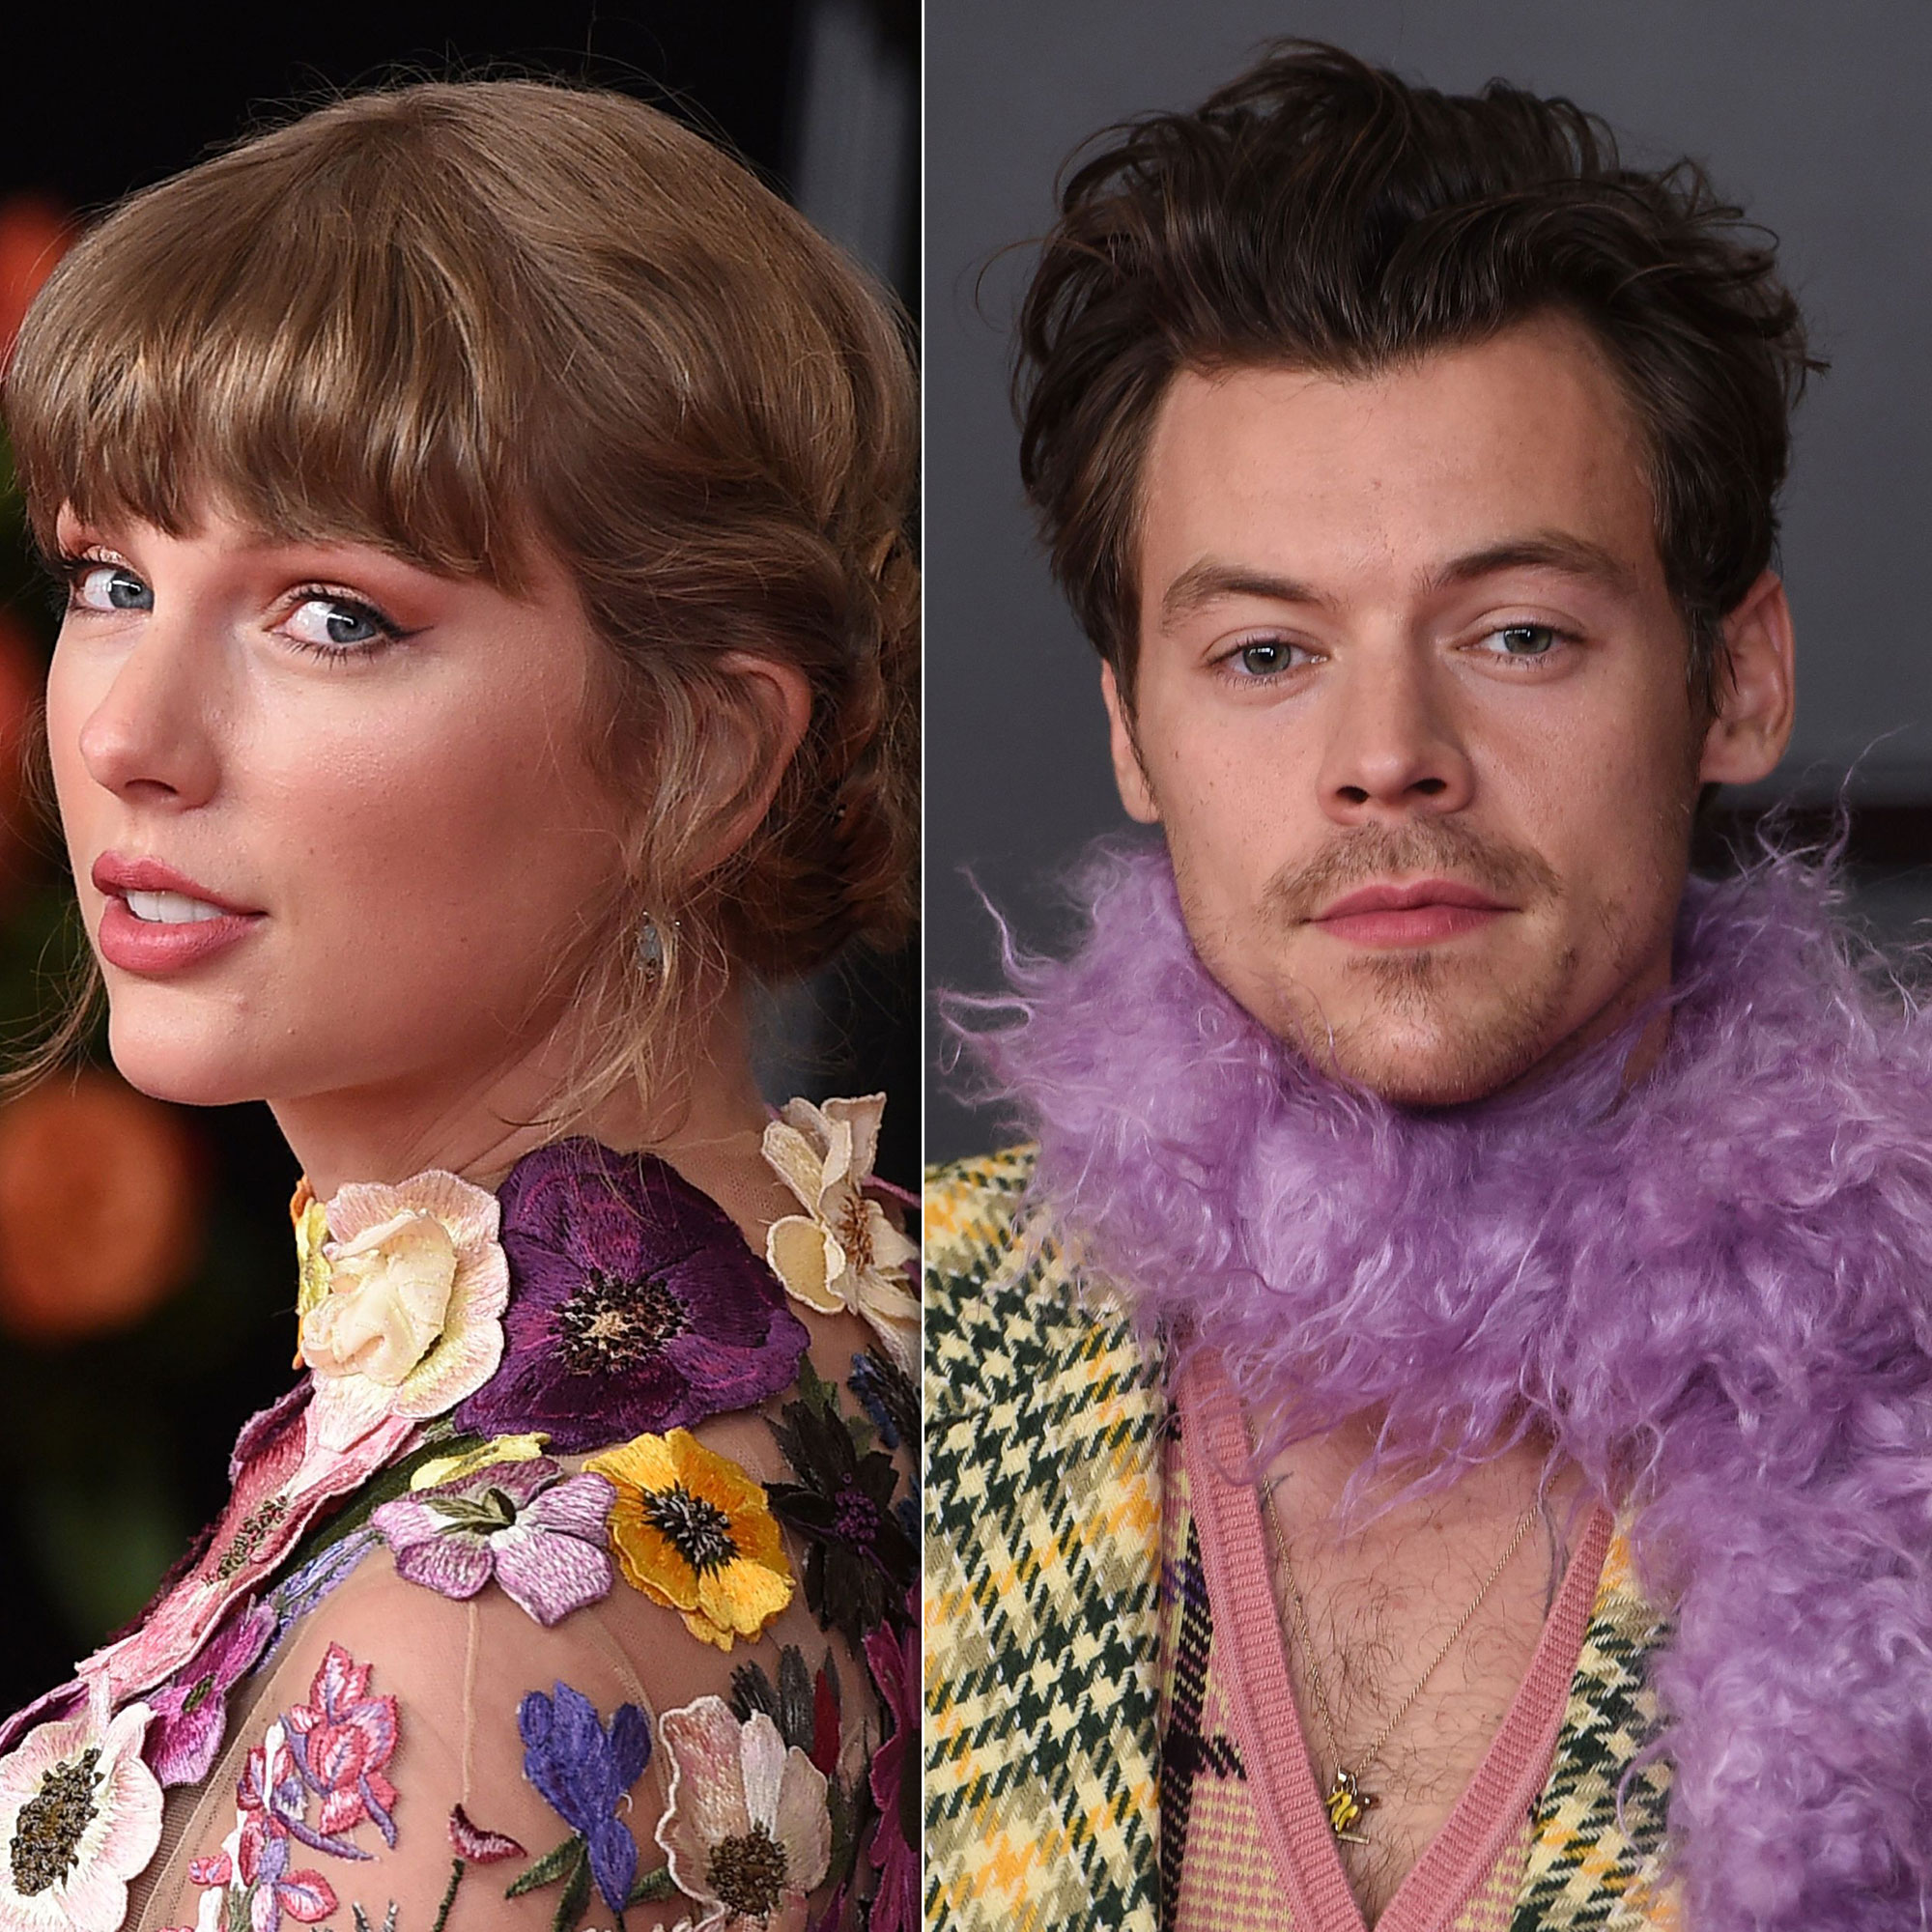 Taylor Swift Solo Porn - Taylor Swift, Harry Styles Reunite at 2021 Grammys: Video